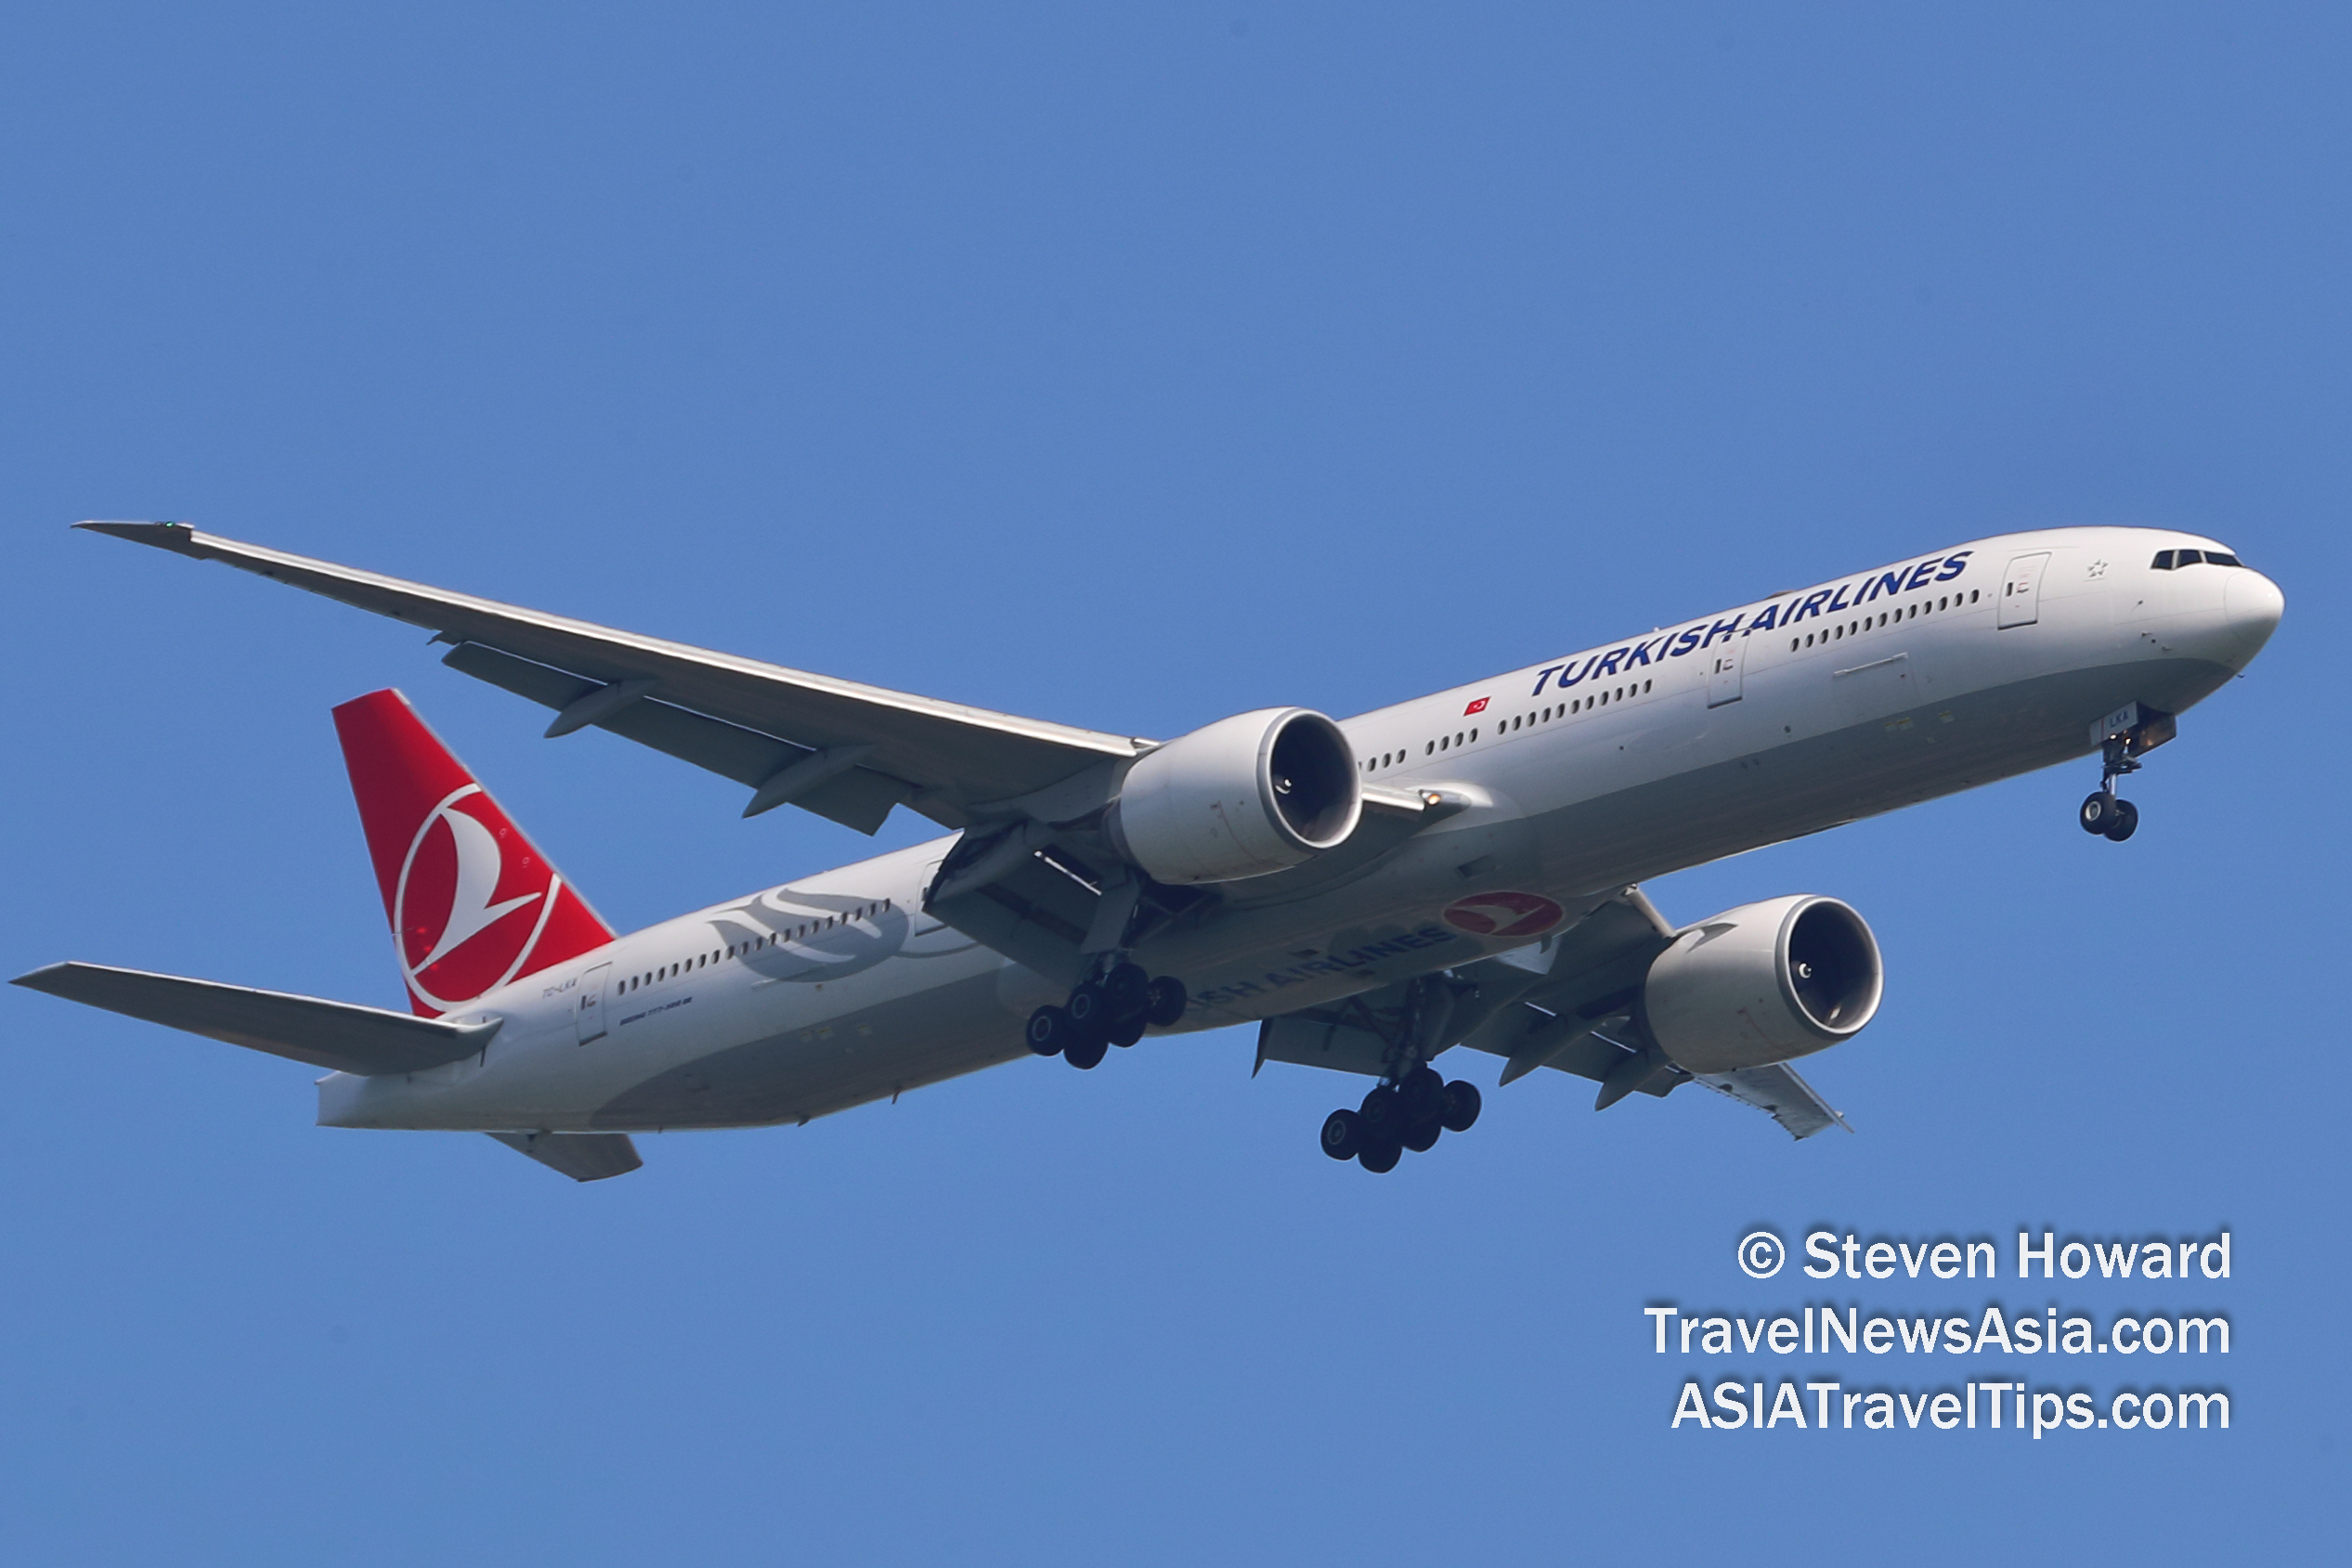 Turkish Airlines Boeing 777 reg: TC-LKA. Picture by Steven Howard of TravelNewsAsia.com Click to enlarge.